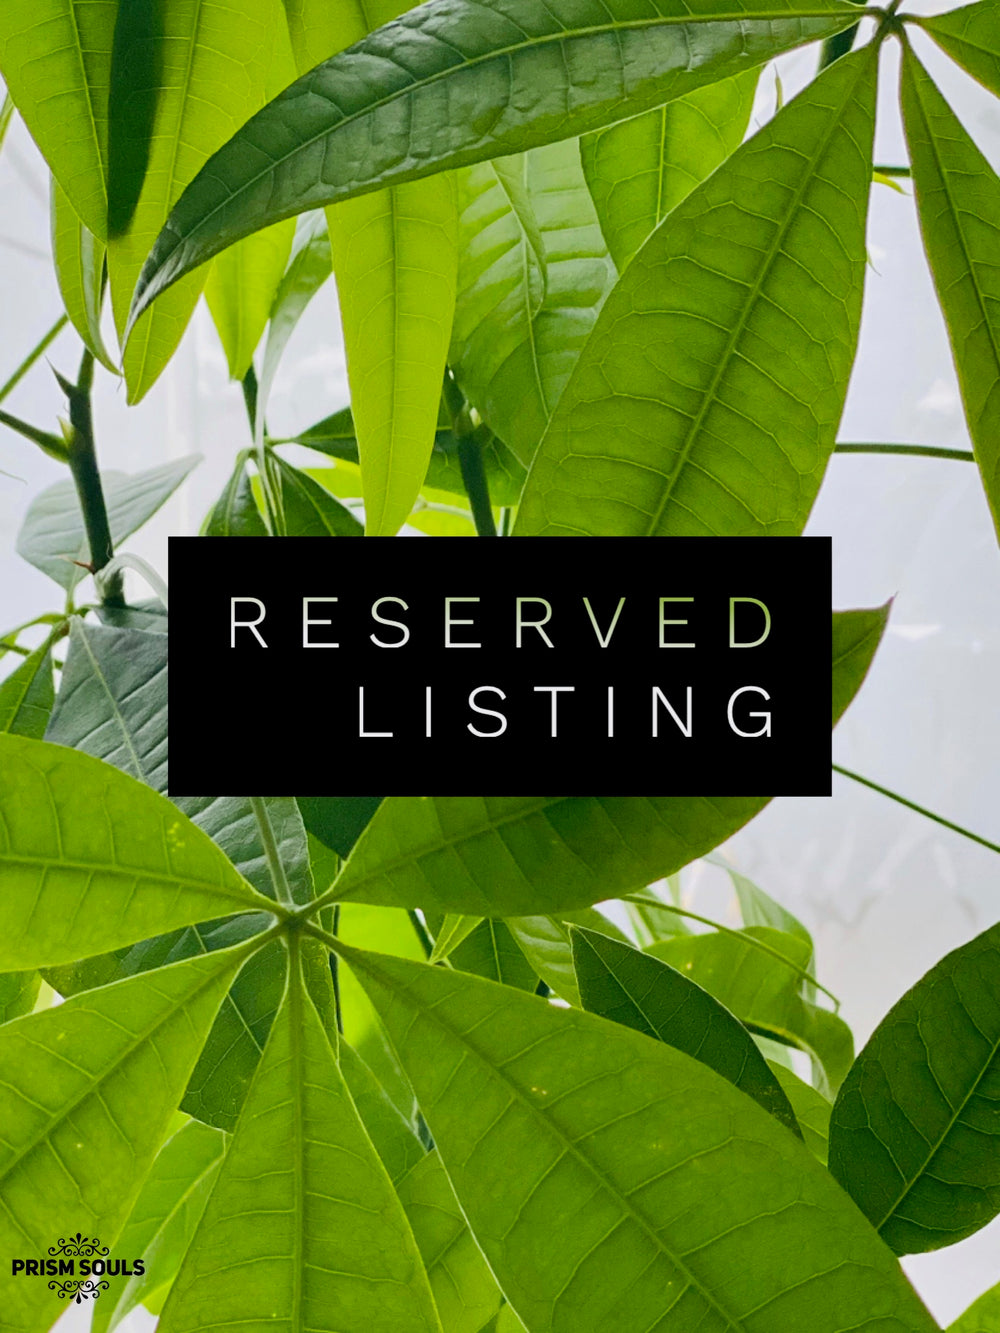 RESERVED LISTING - audra.__nicole